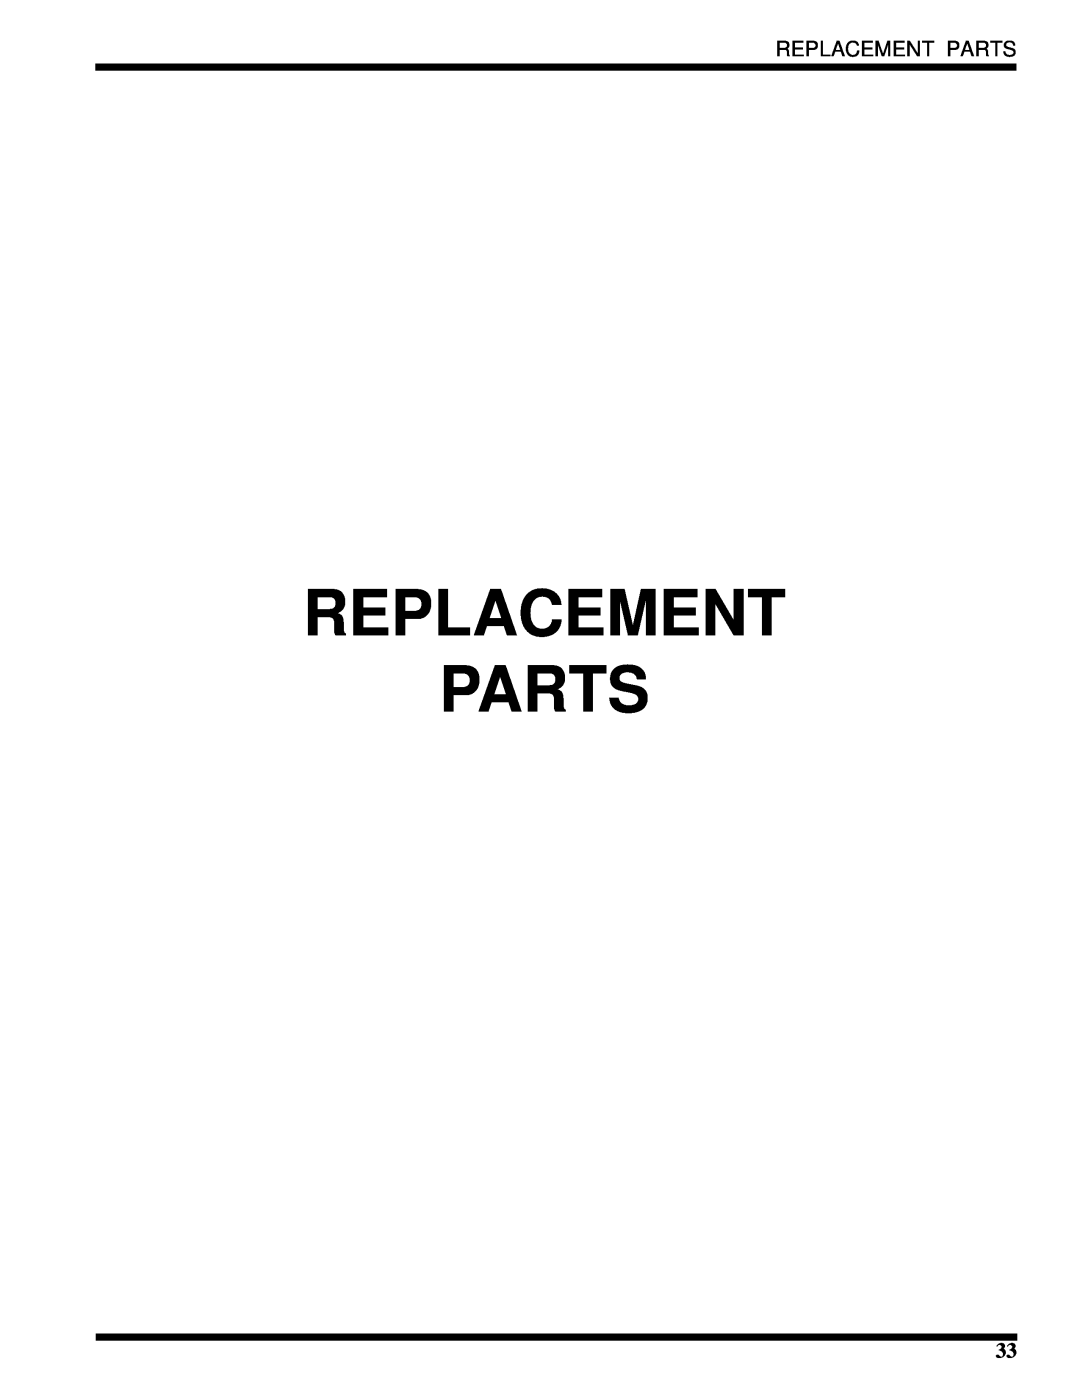 Moyer Diebel MH-6LM2, MH-6NM2, MH-60M2 technical manual Replacement Parts 